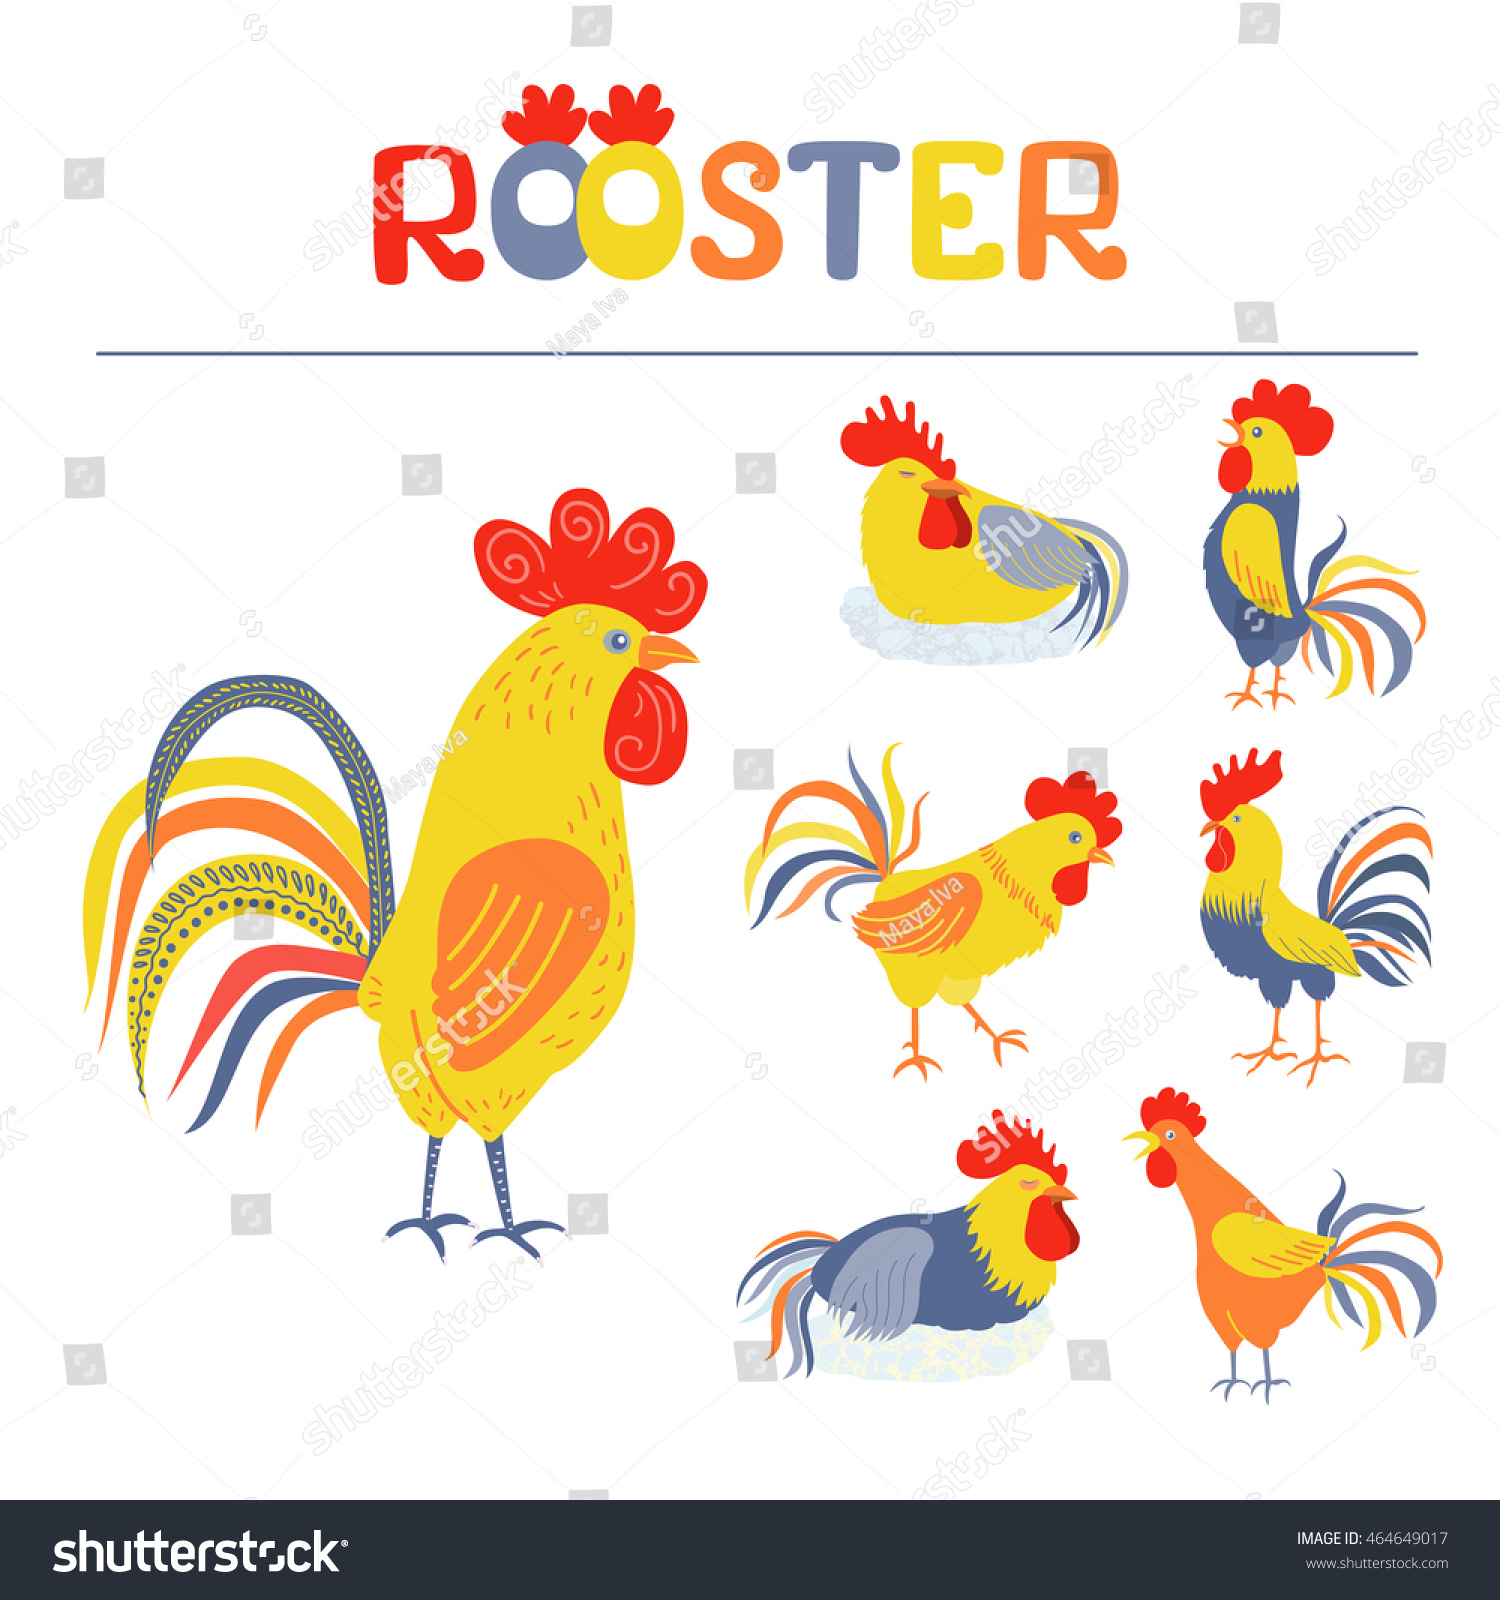 SVG of Seven lovely cockerels on a white background. Illustration in flat style. Rooster Set, with Standing rooster, Cock crowing. Cock-a-doodle-doo. Cockerel sleeps. Rooster symbol of Chinese New Year svg